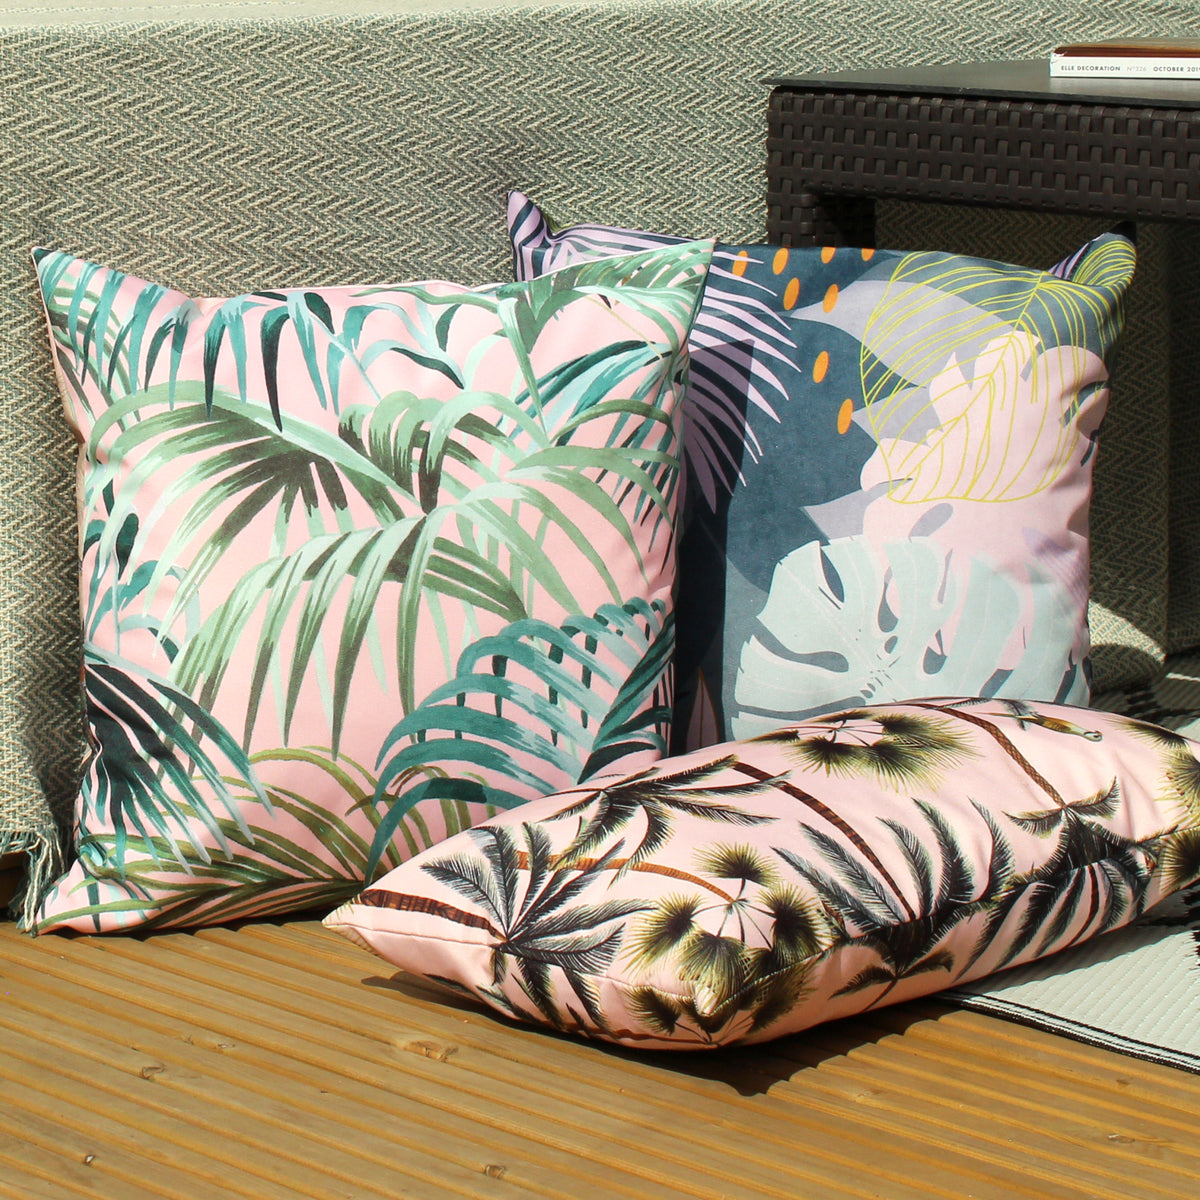 Leafy 43cm Reversible Outdoor Polyester Cushion